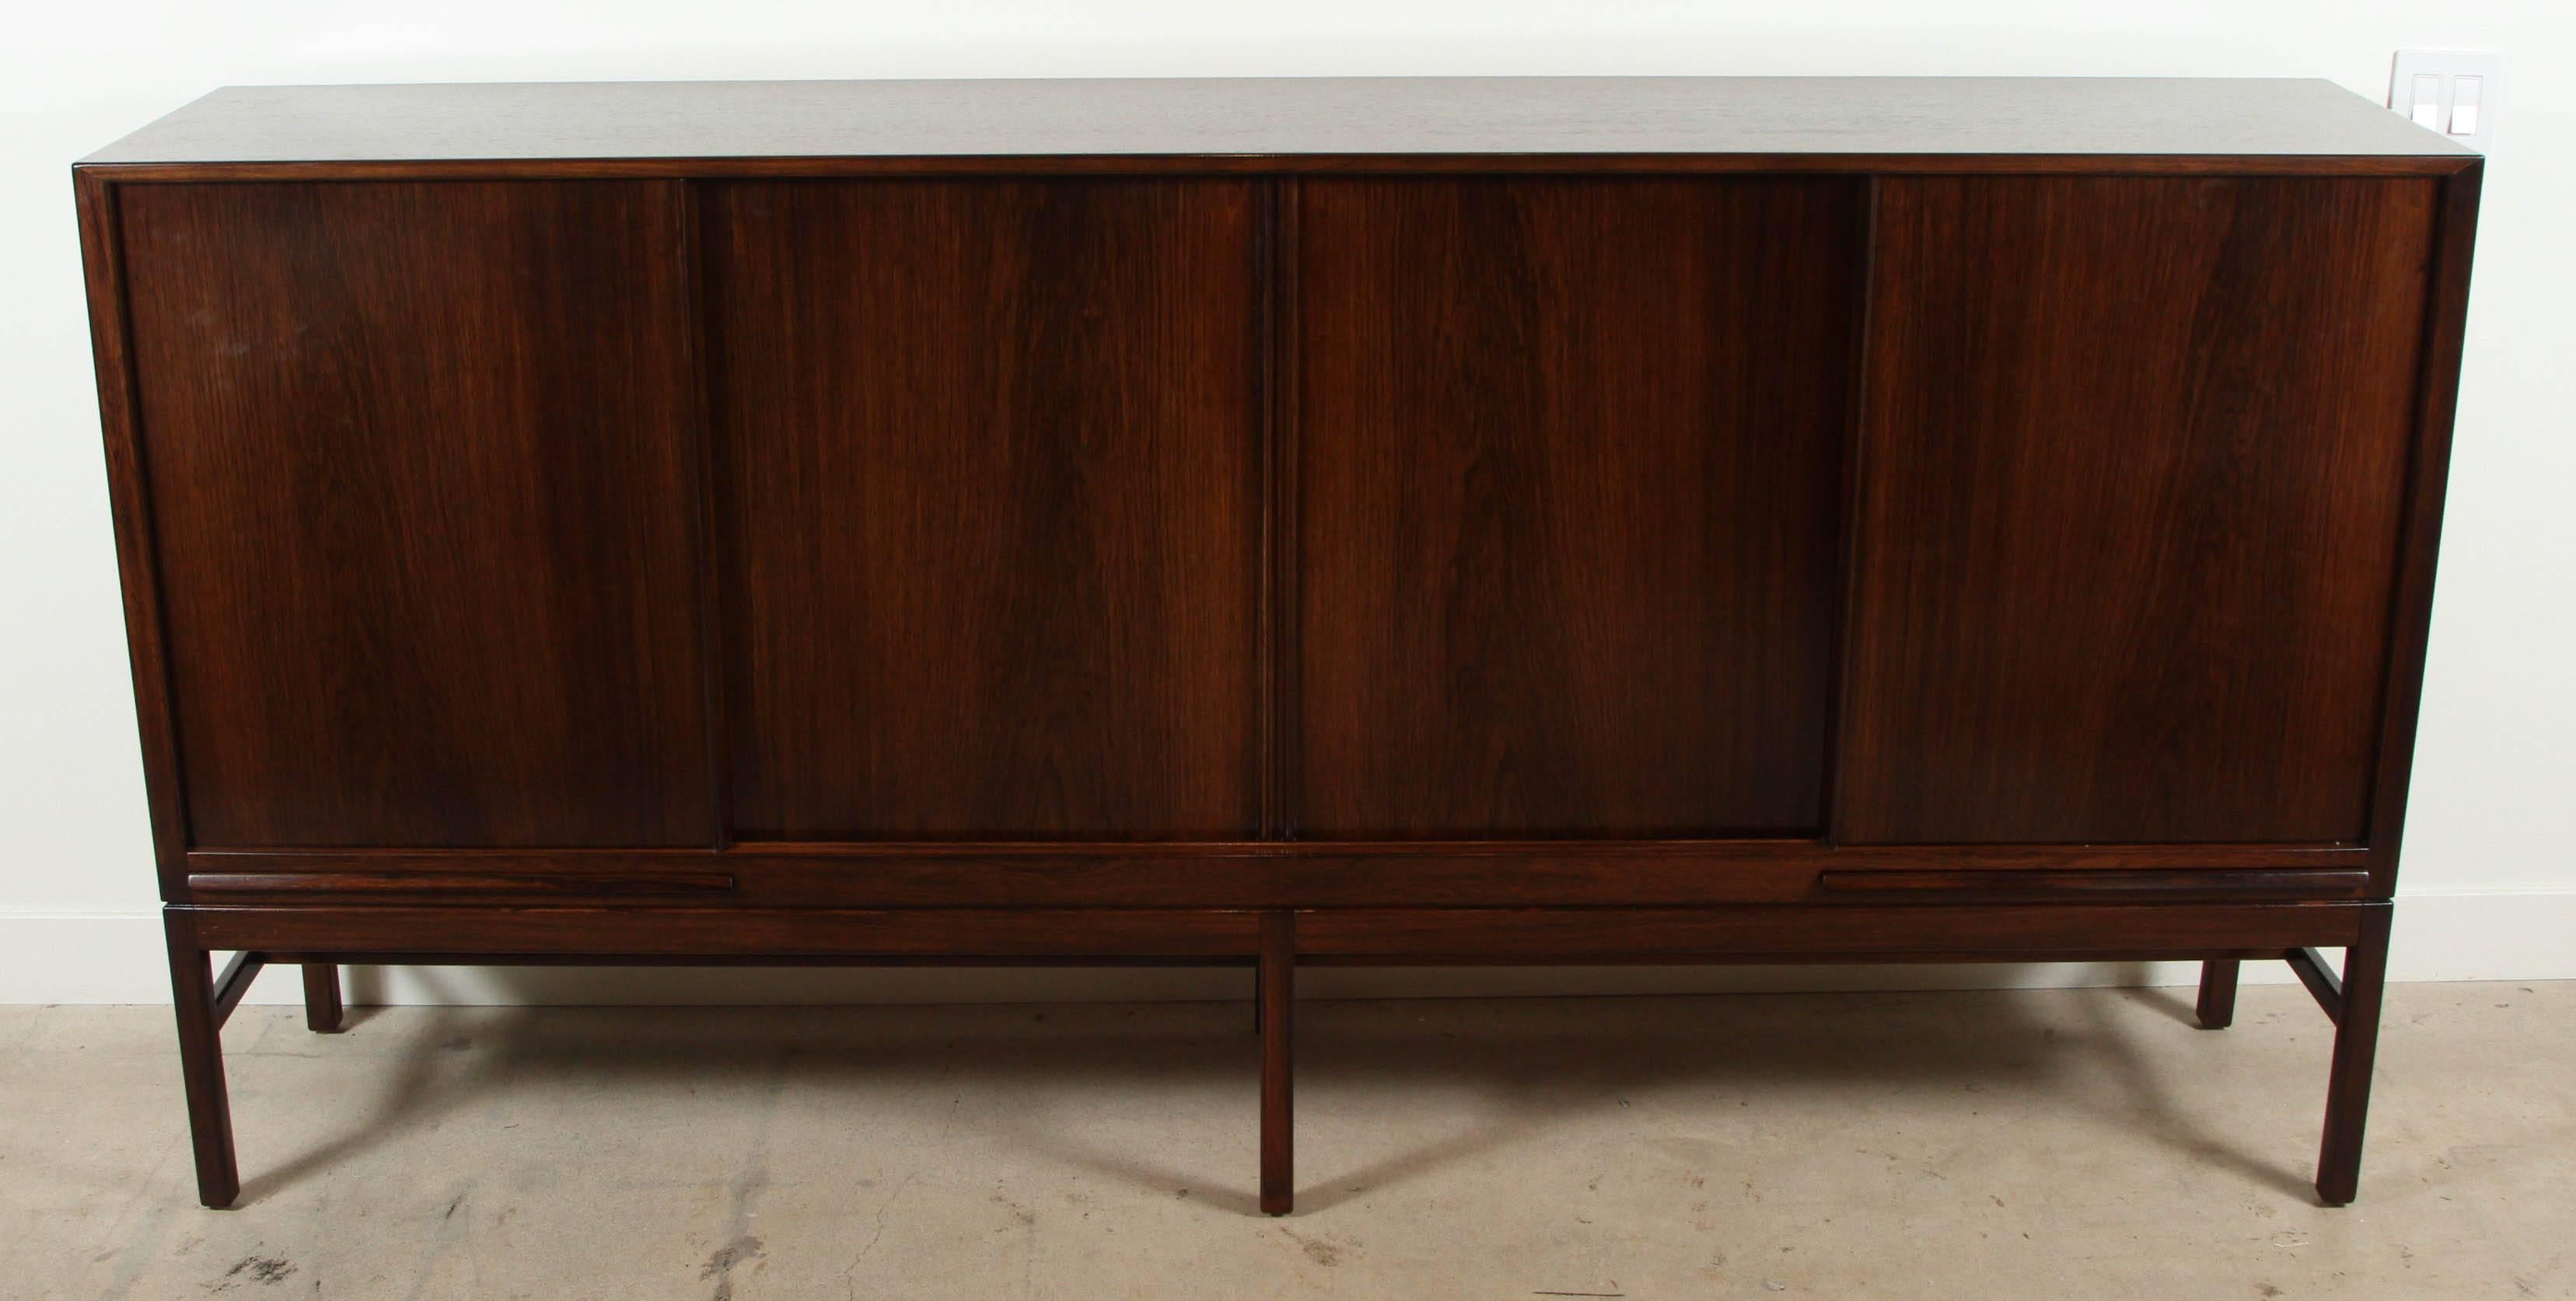 Tall rosewood credenza by Kurt Ostervig